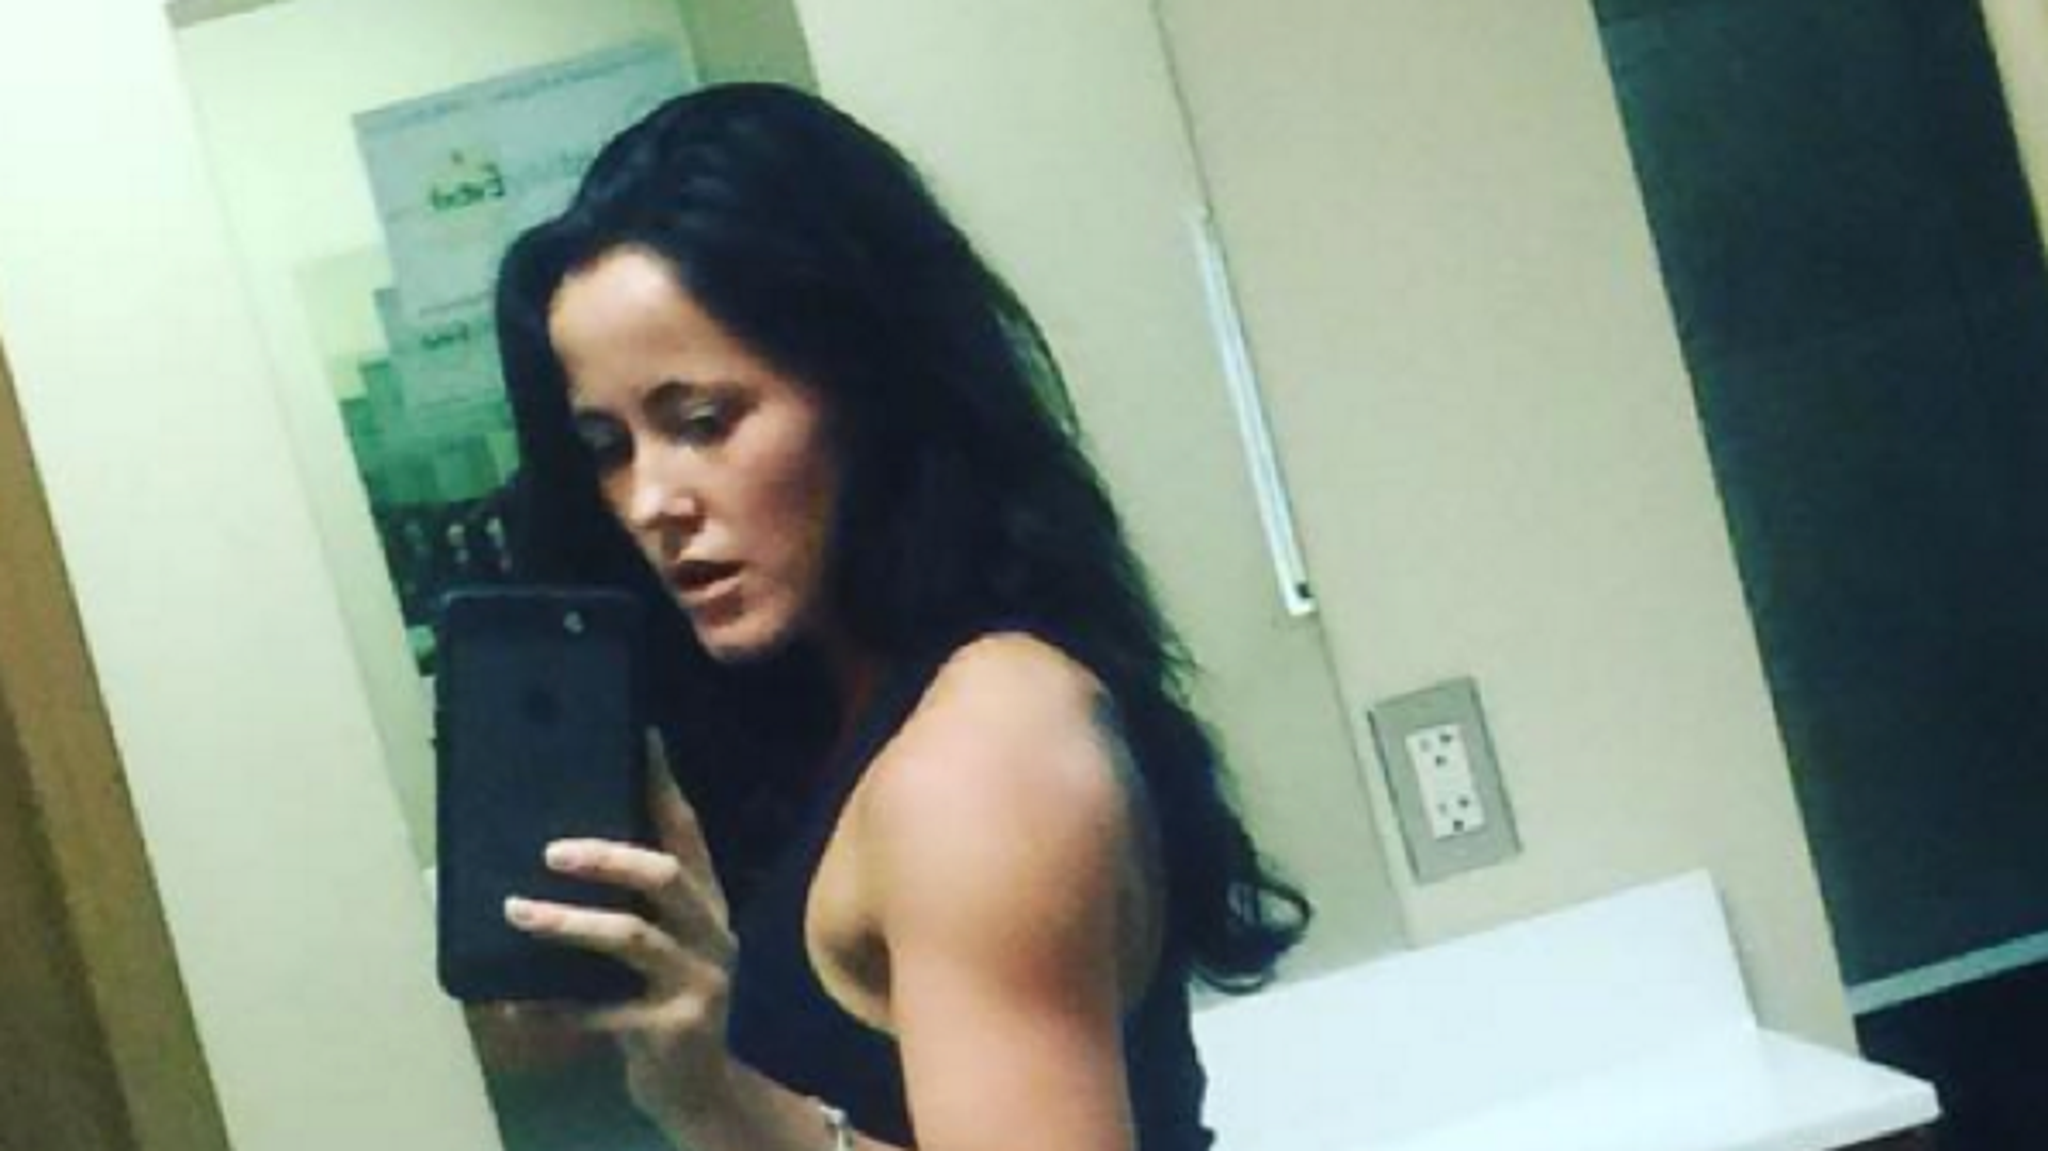 Naked Photos Of Jenelle Evans Leaked Guess Who Released Them Cafemom